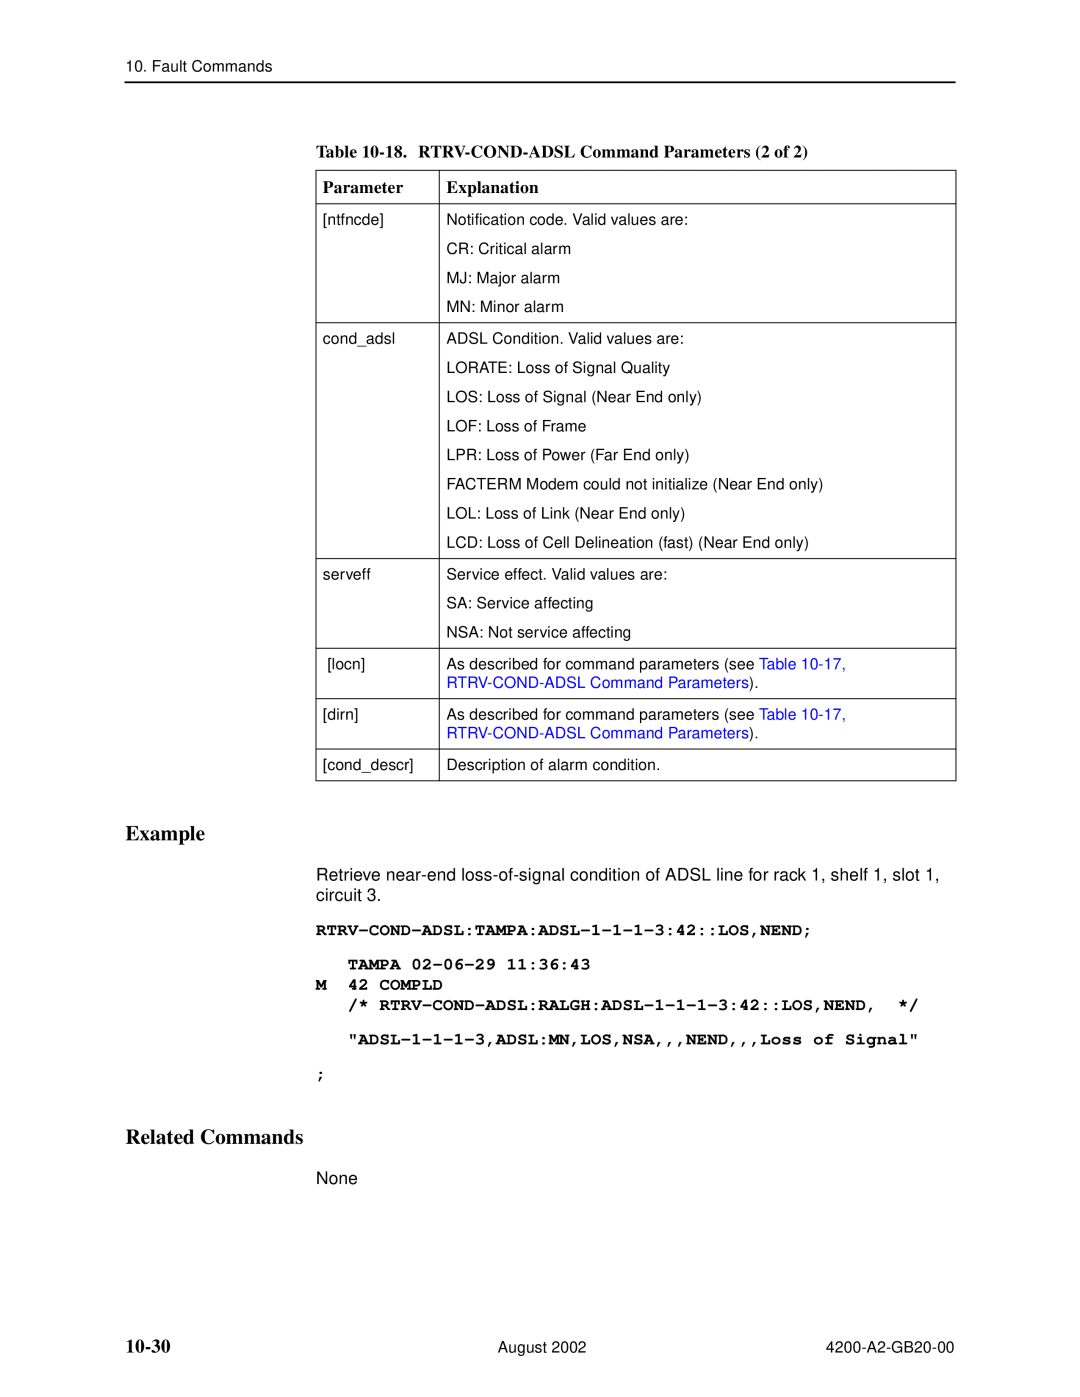 Paradyne 4200 manual 10-30, 18. RTRV-COND-ADSL Command Parameters 2 of, Example, Related Commands, Explanation 